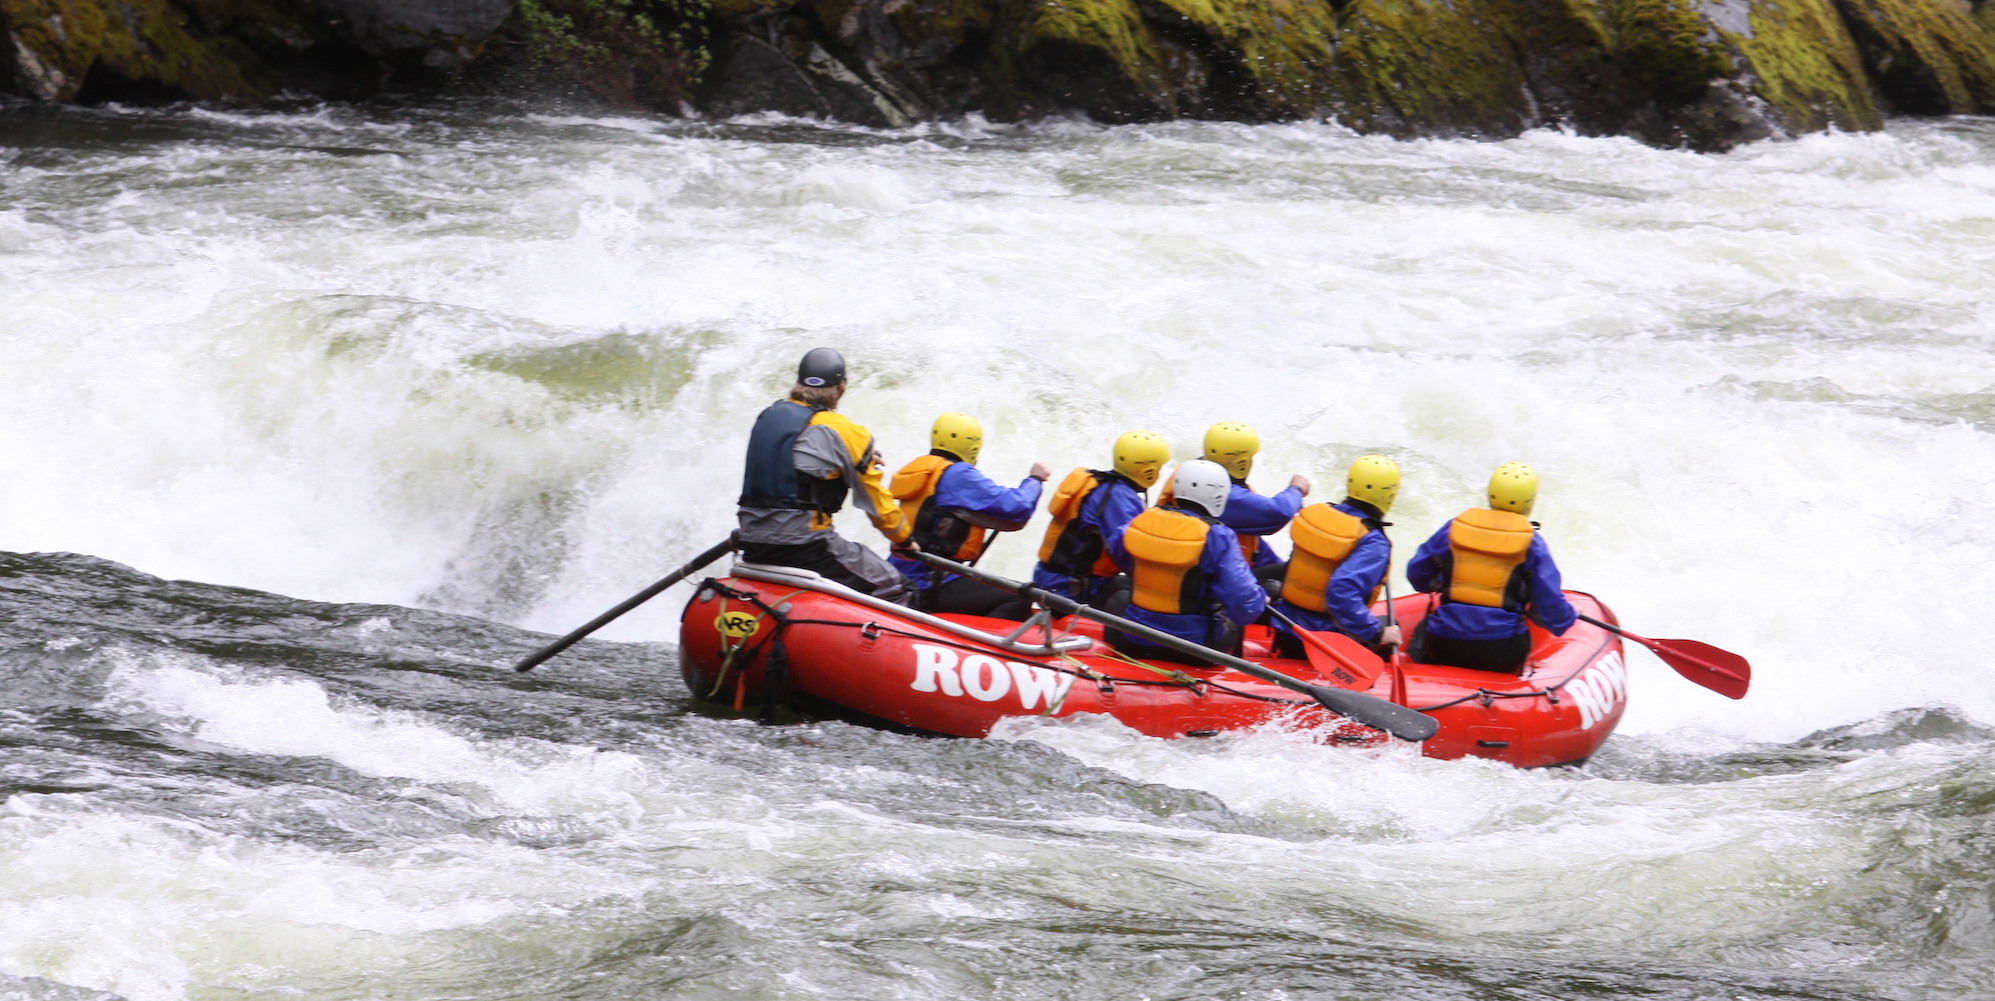 Red raft full of passengers from behind about to enter a big whitewater rapid on the Lochsa River